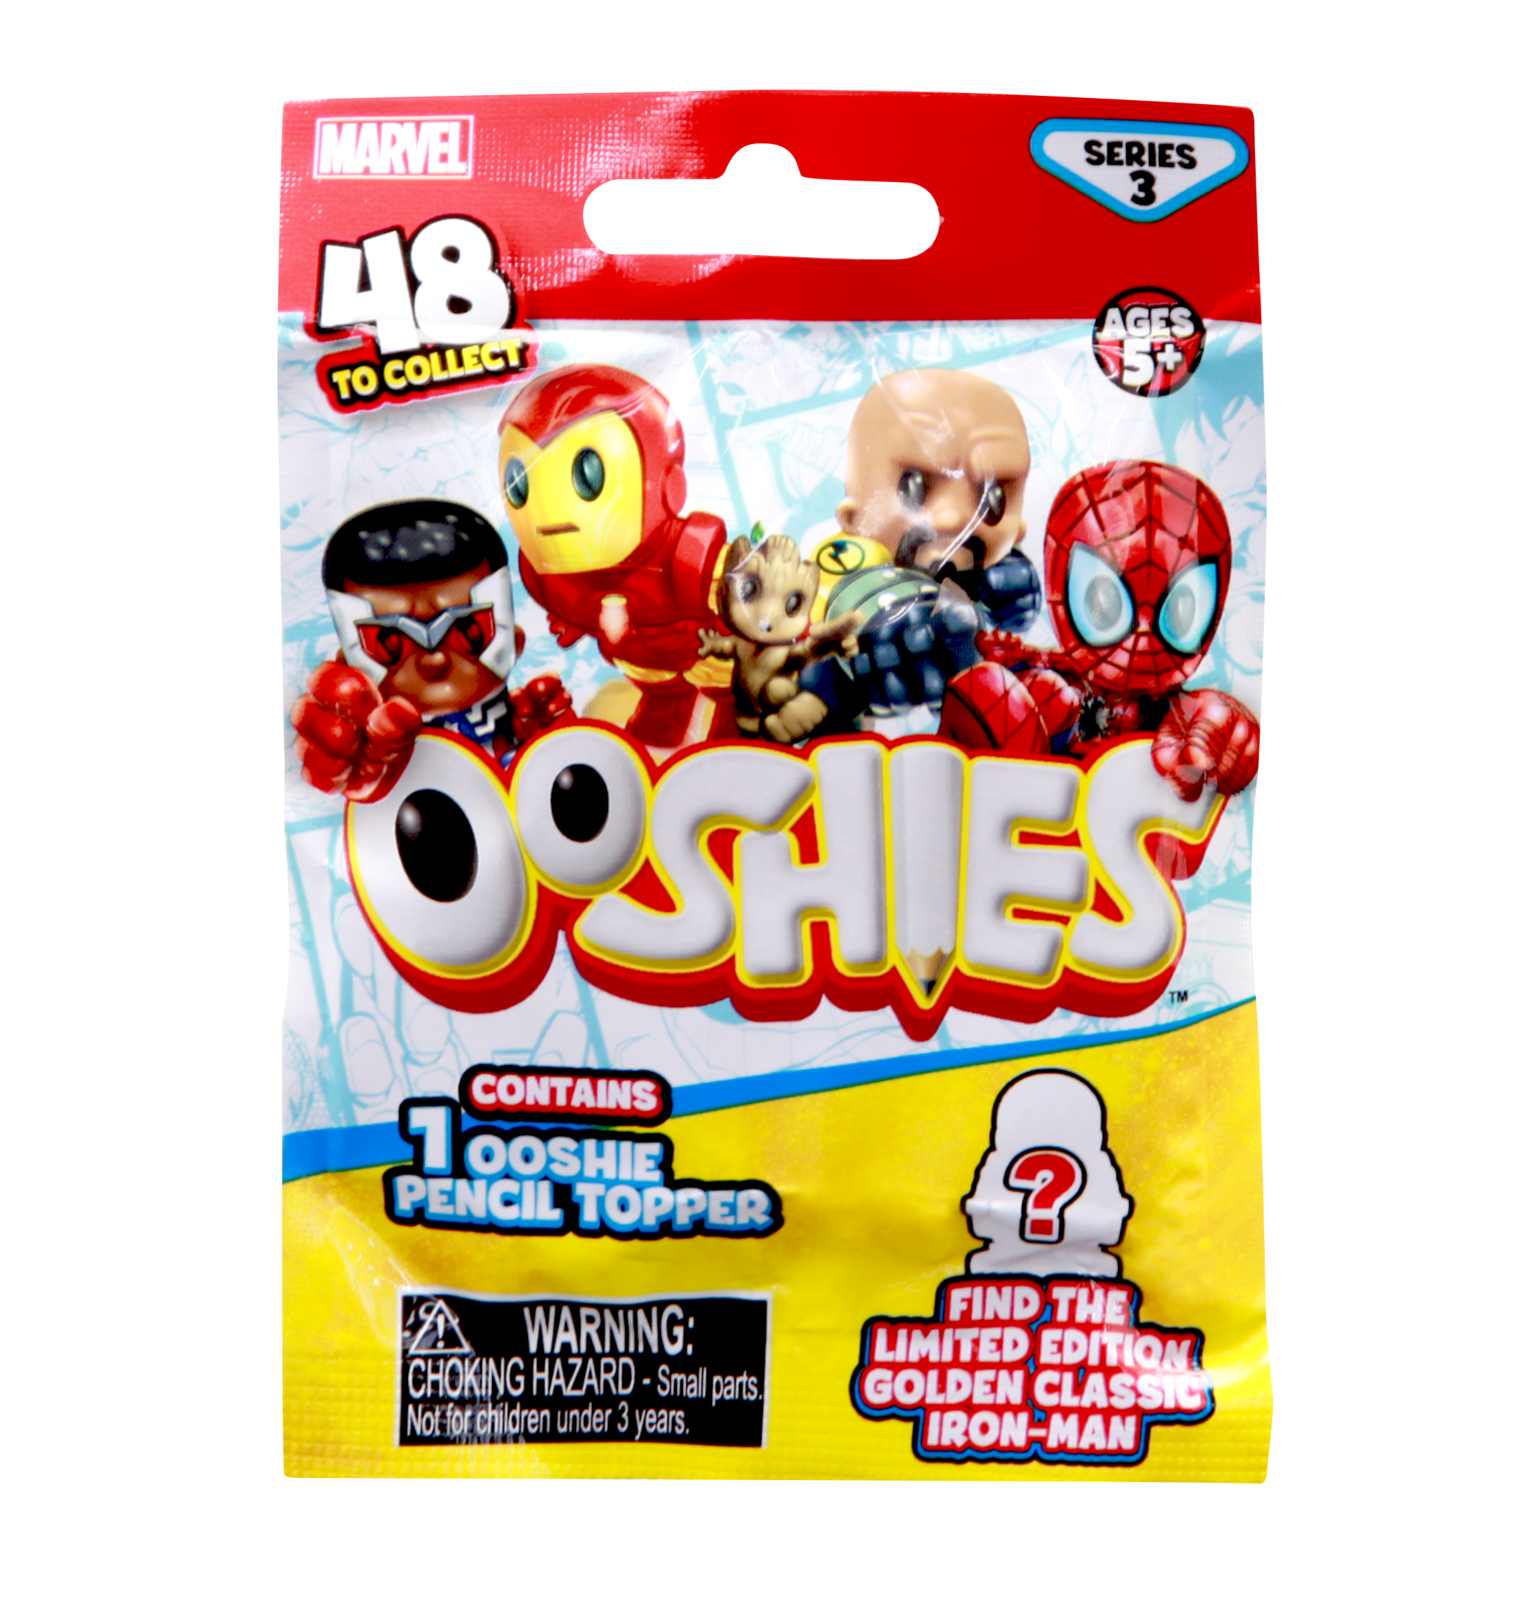 NEW! Ooshies Marvel Series 3. Blind Bag. Common, Rare, Limited Editions ...